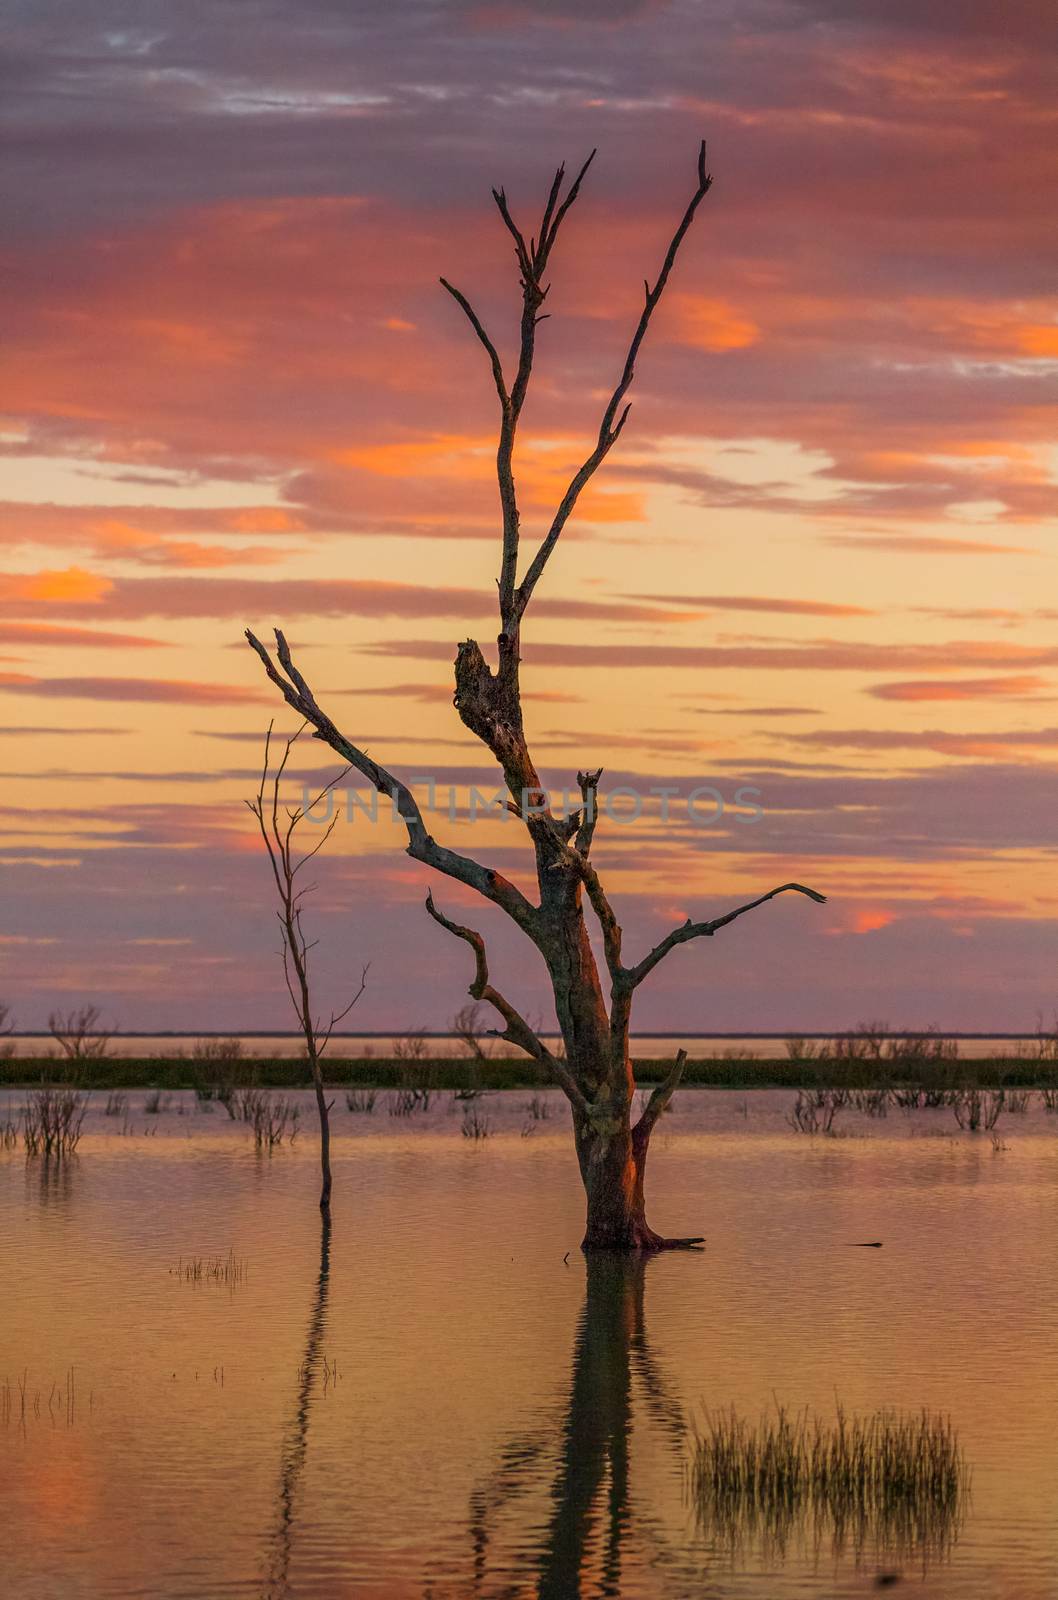 The many colours of an outback sunset viewed from Lake Menindee near Broken HillISO:800